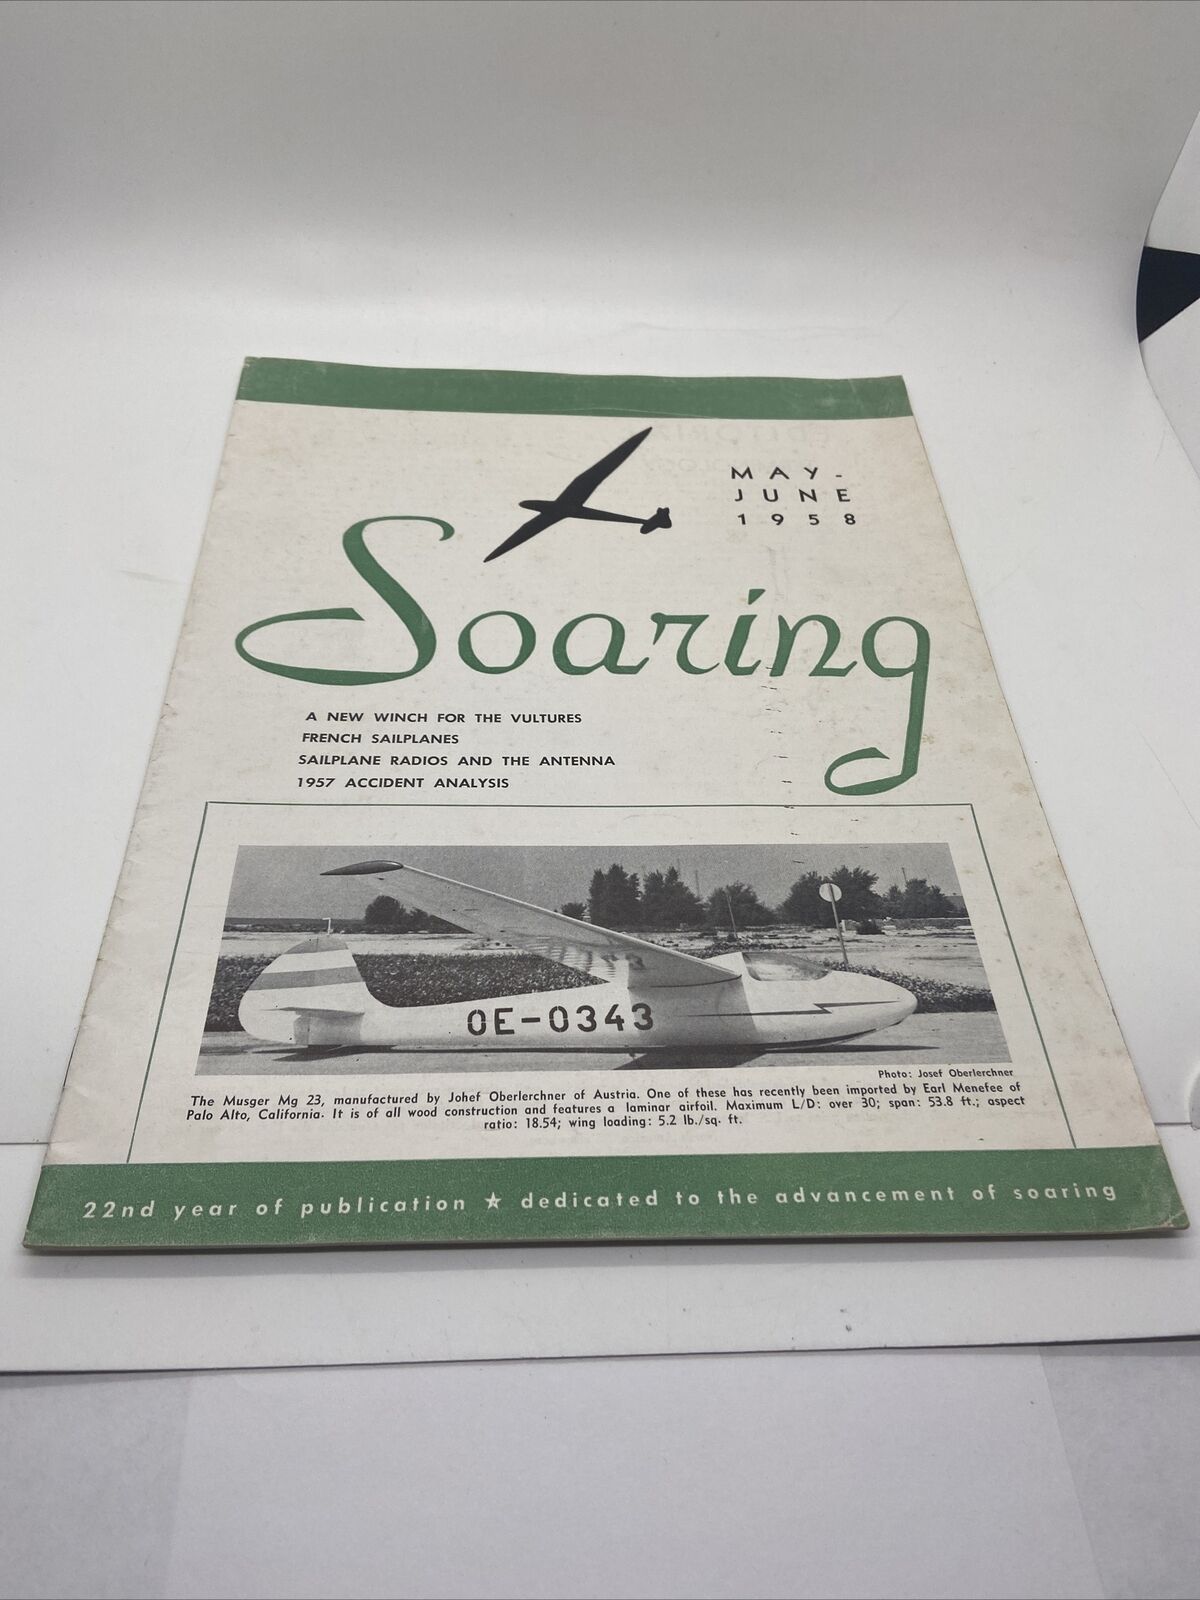 May-June 1958 Vintage Aviation Magazine - Soaring - 22nd Year Of Publication